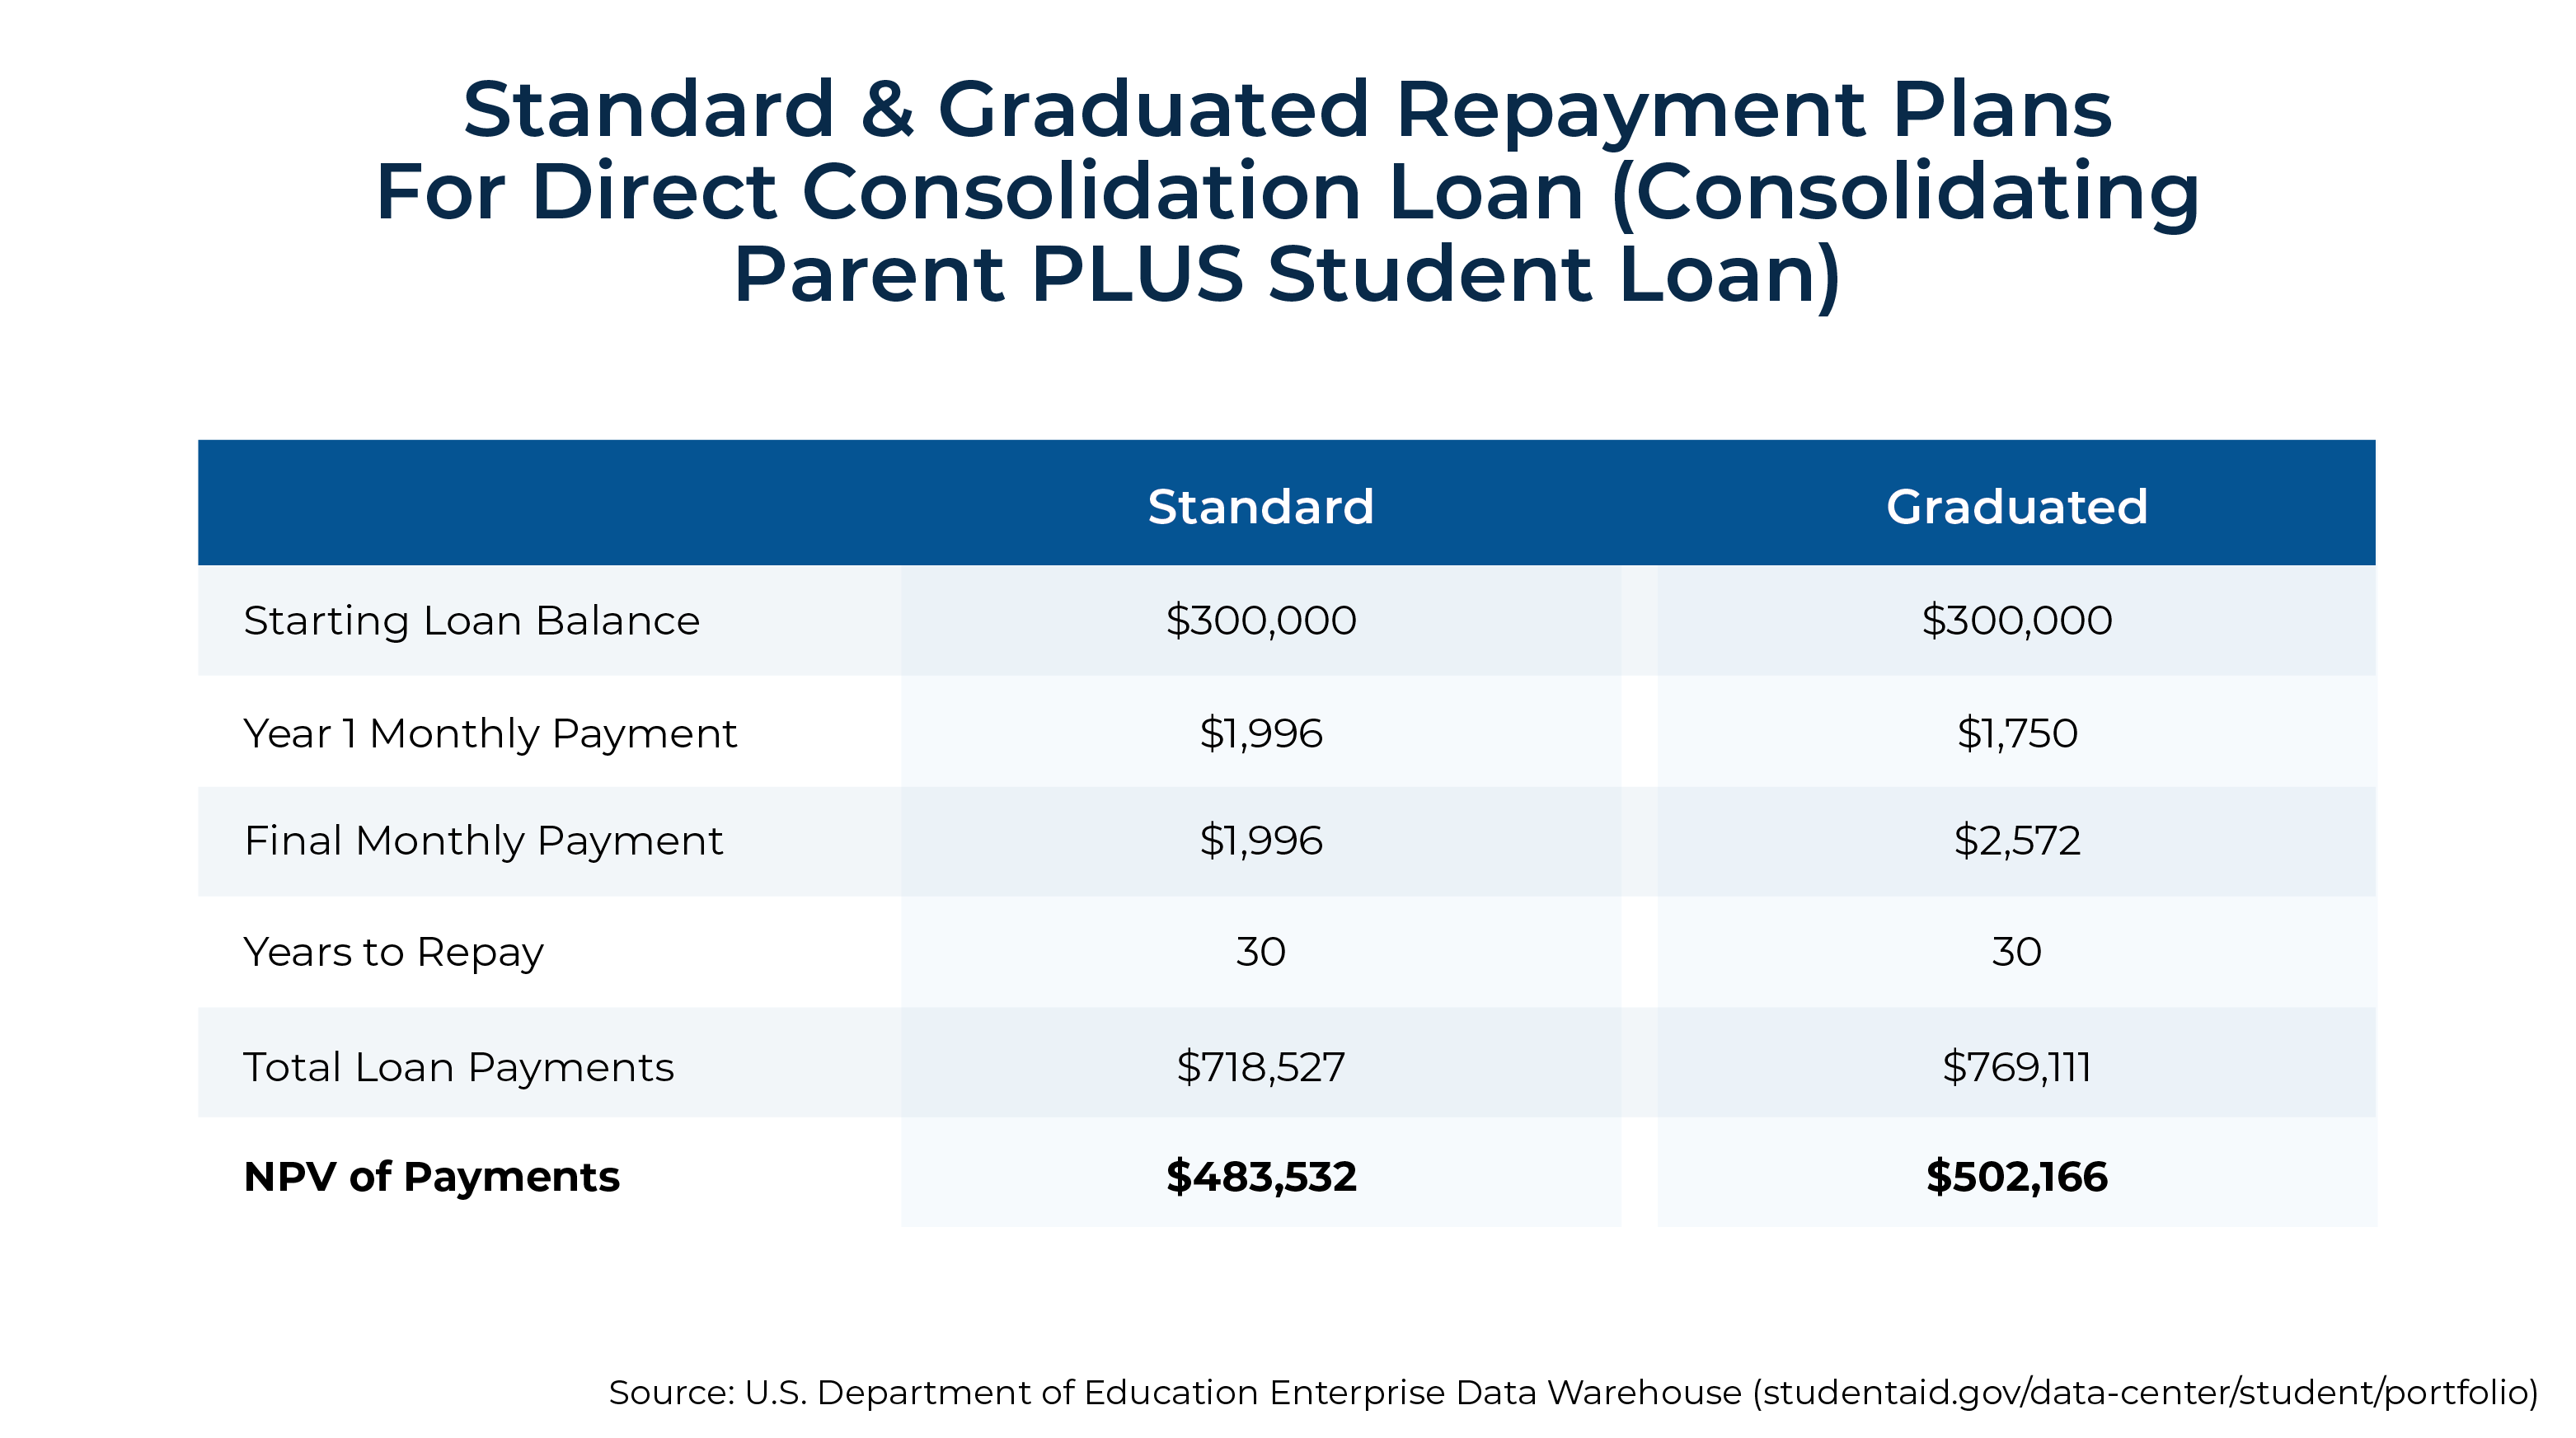 Standard and Graduated Repayment Plans for Direct Consolidation Loan